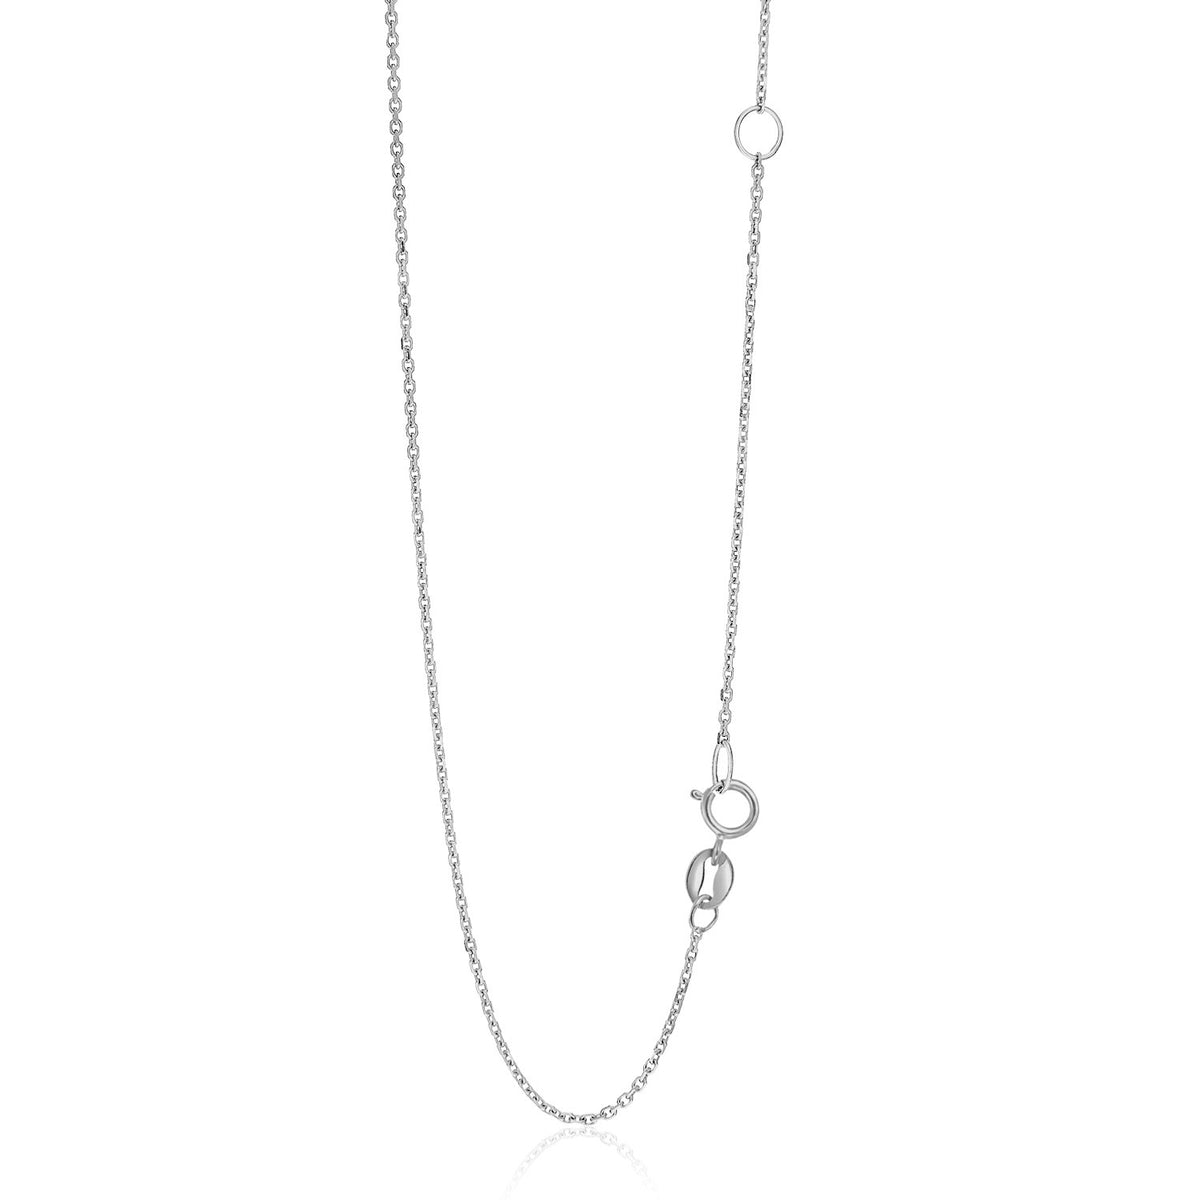 Adjustable Cable Chain - 14k White Gold 1.10mm